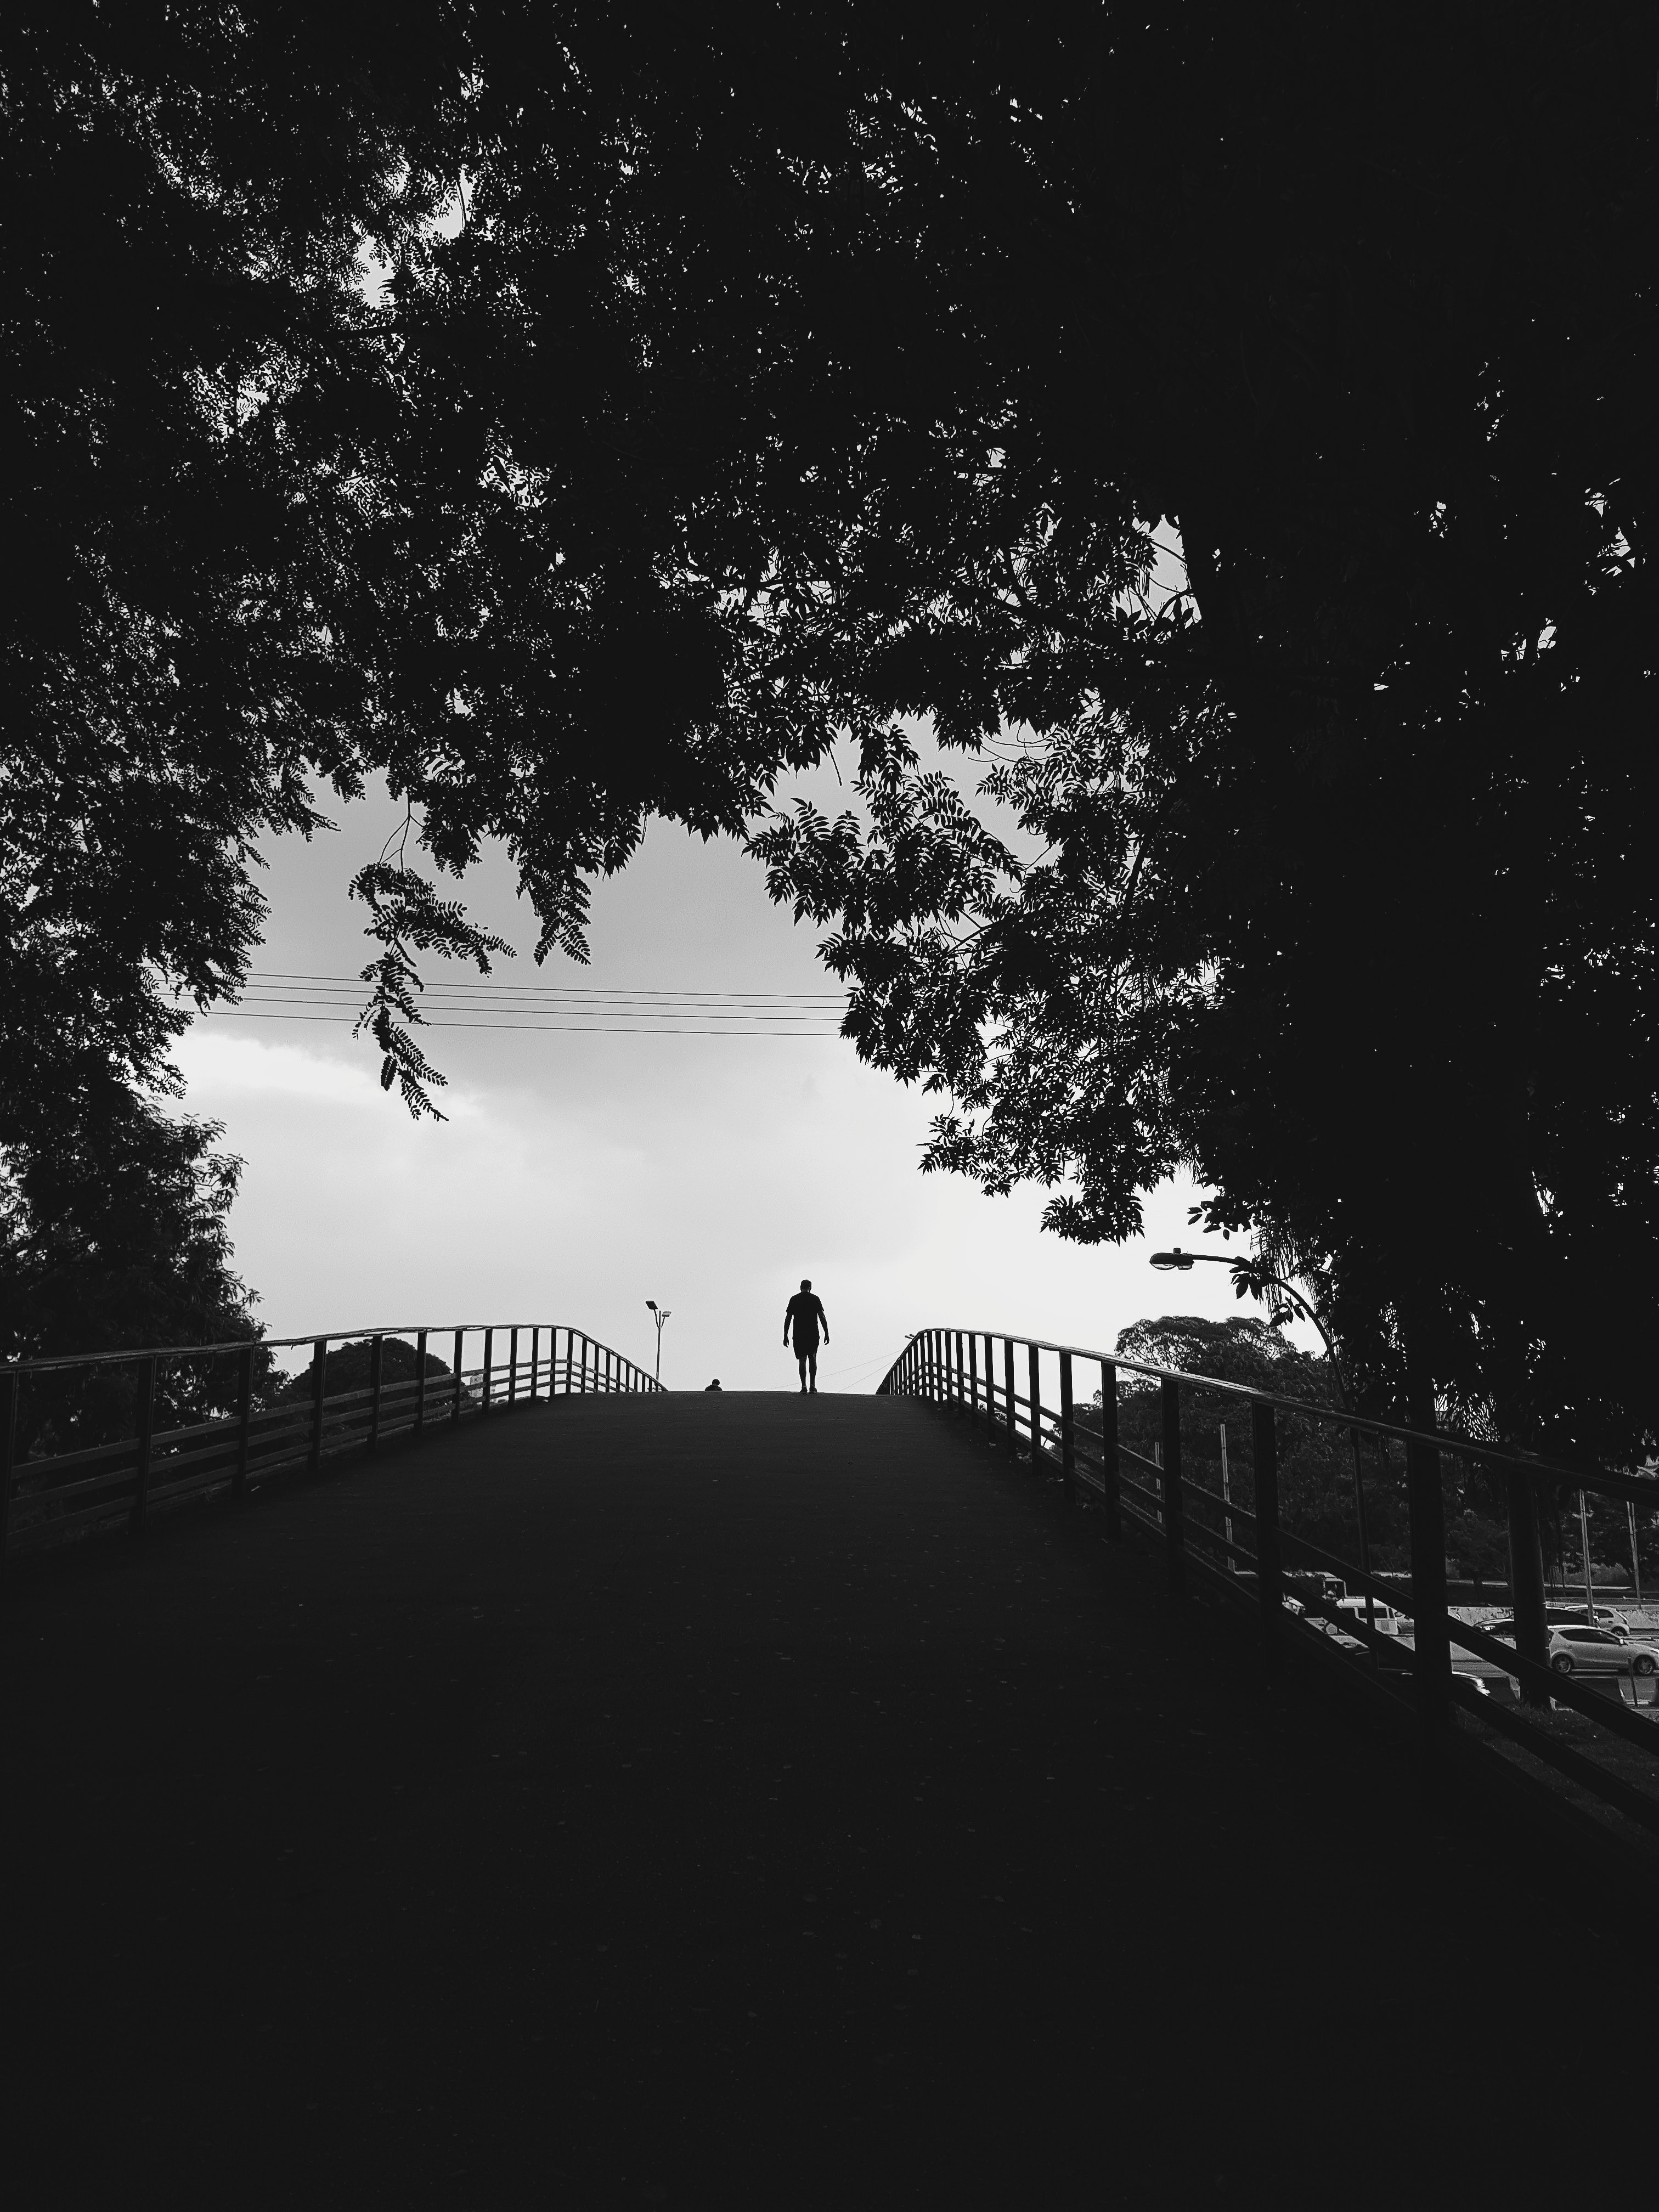 alone, trees, black, silhouette, stroll, bw, chb, loneliness, lonely Panoramic Wallpaper